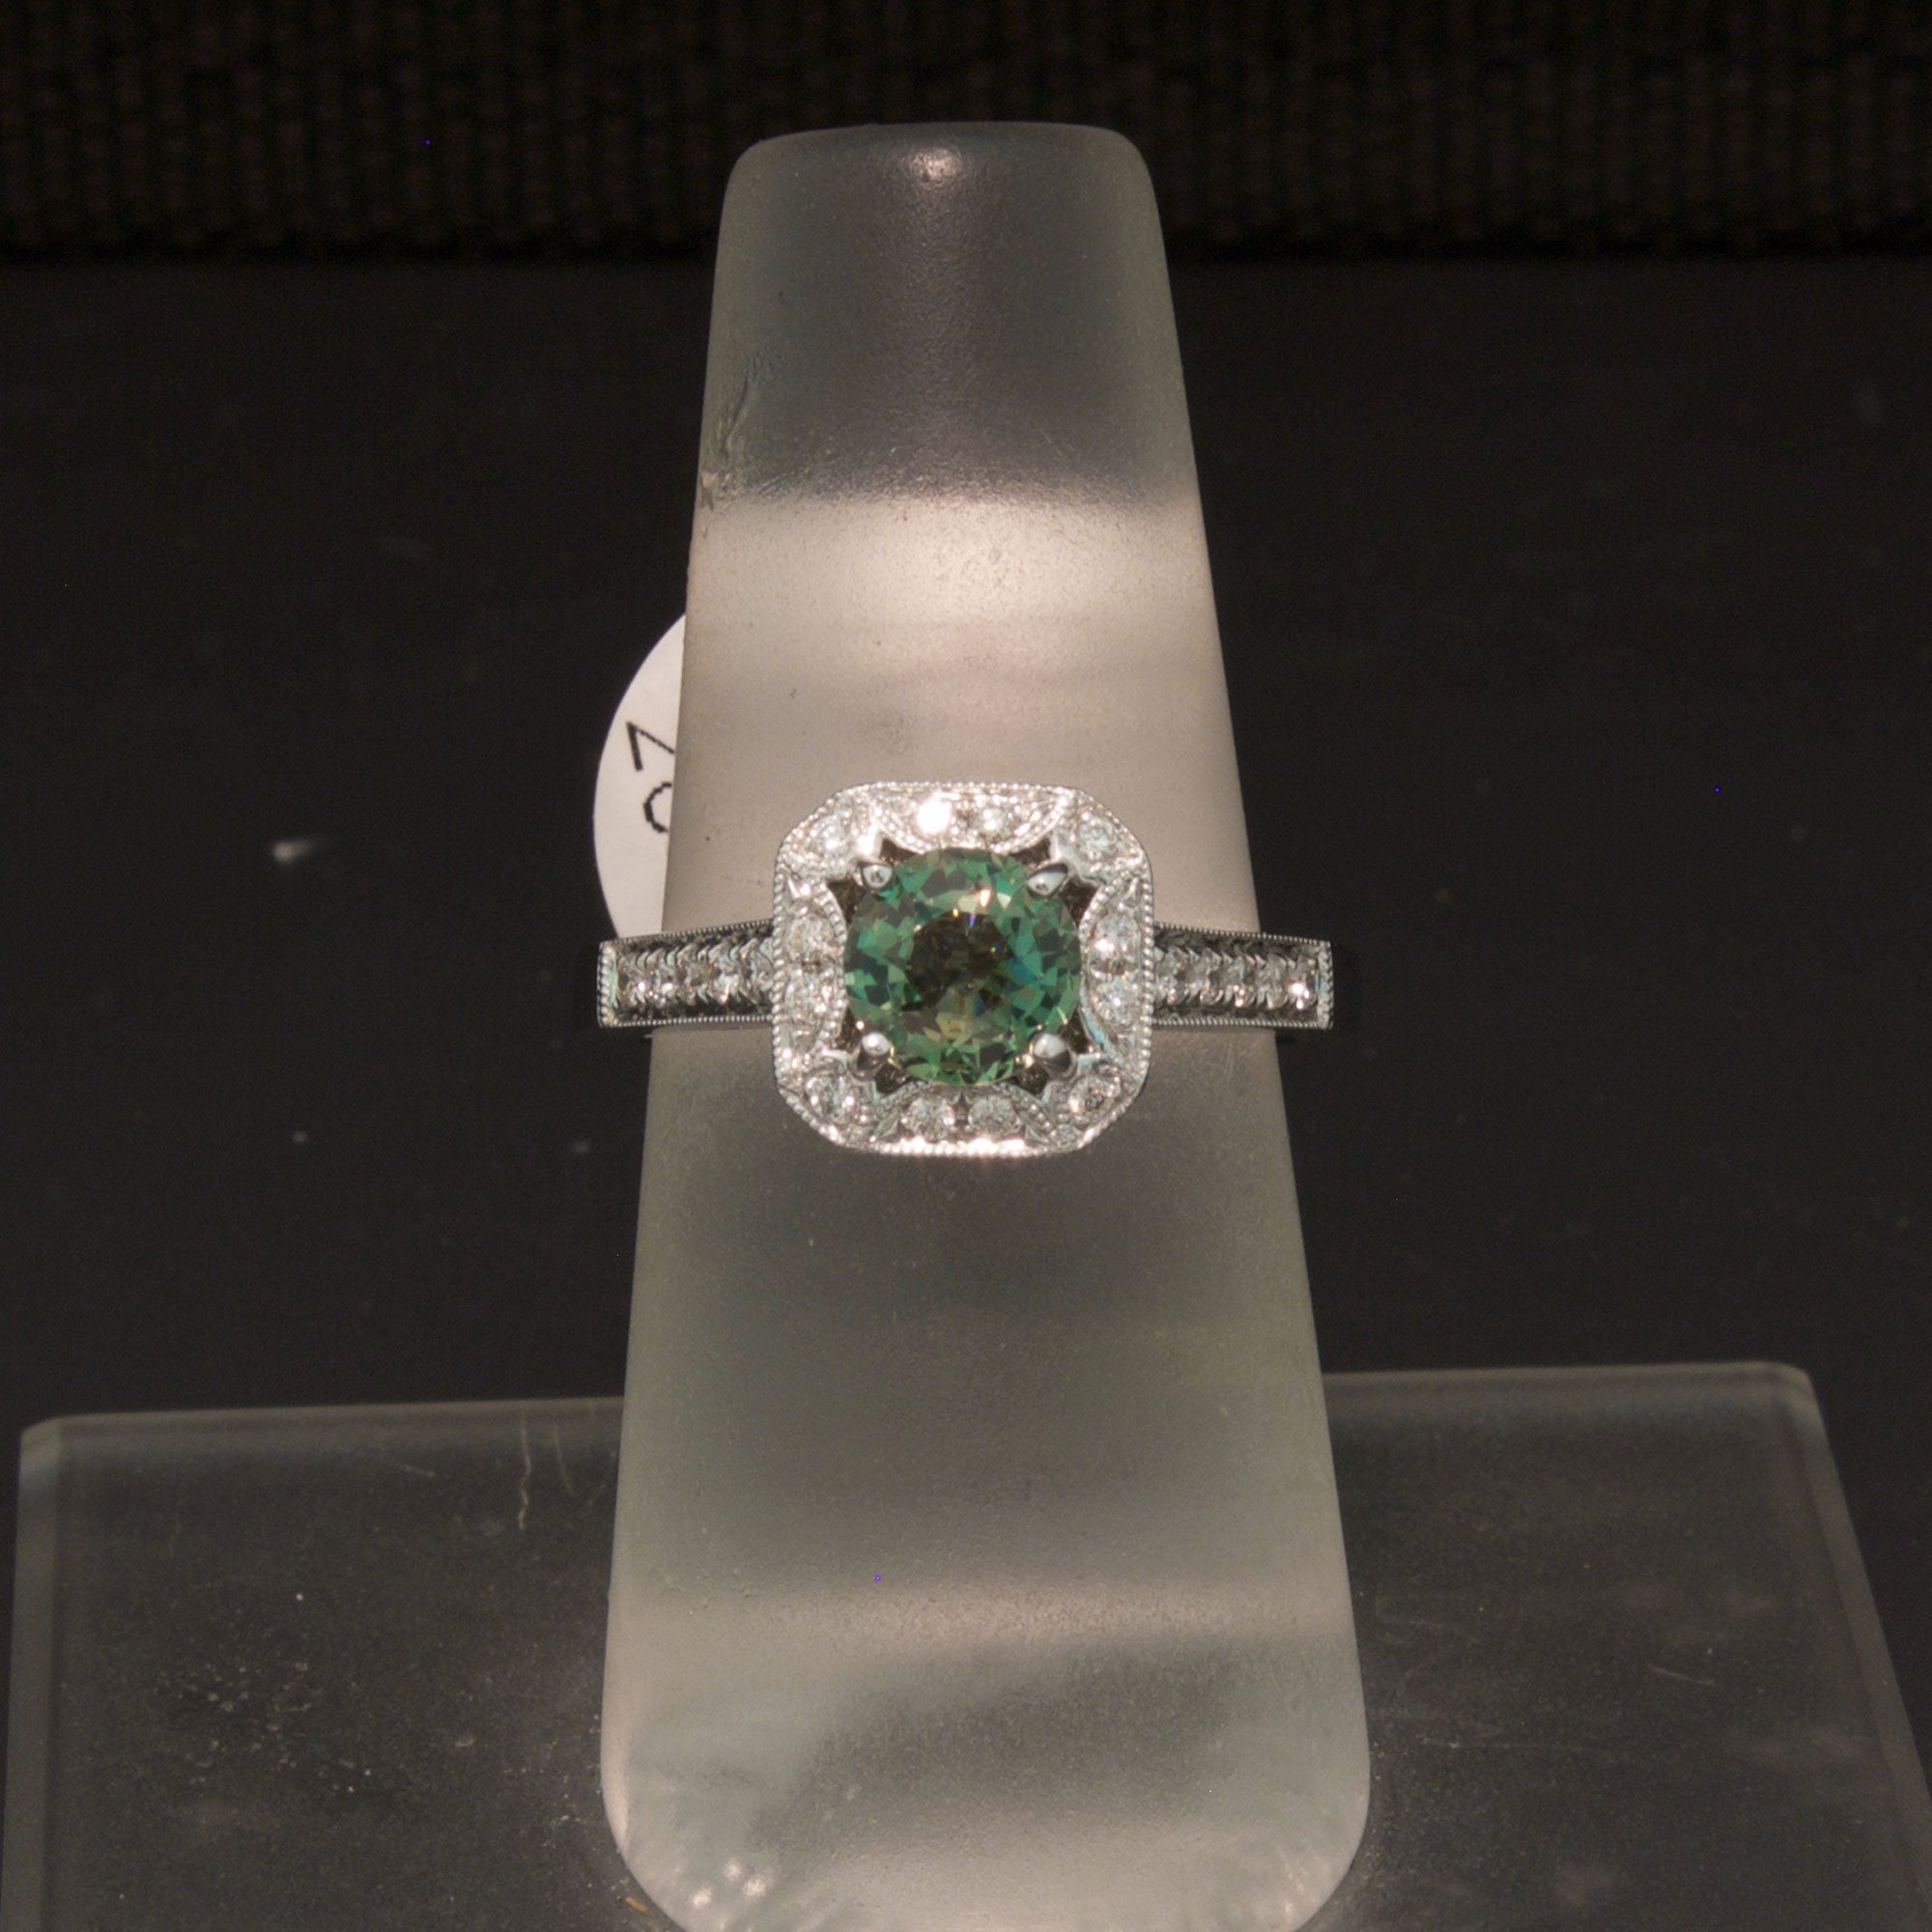 Ring with Green Diamond in White Gold | KLENOTA